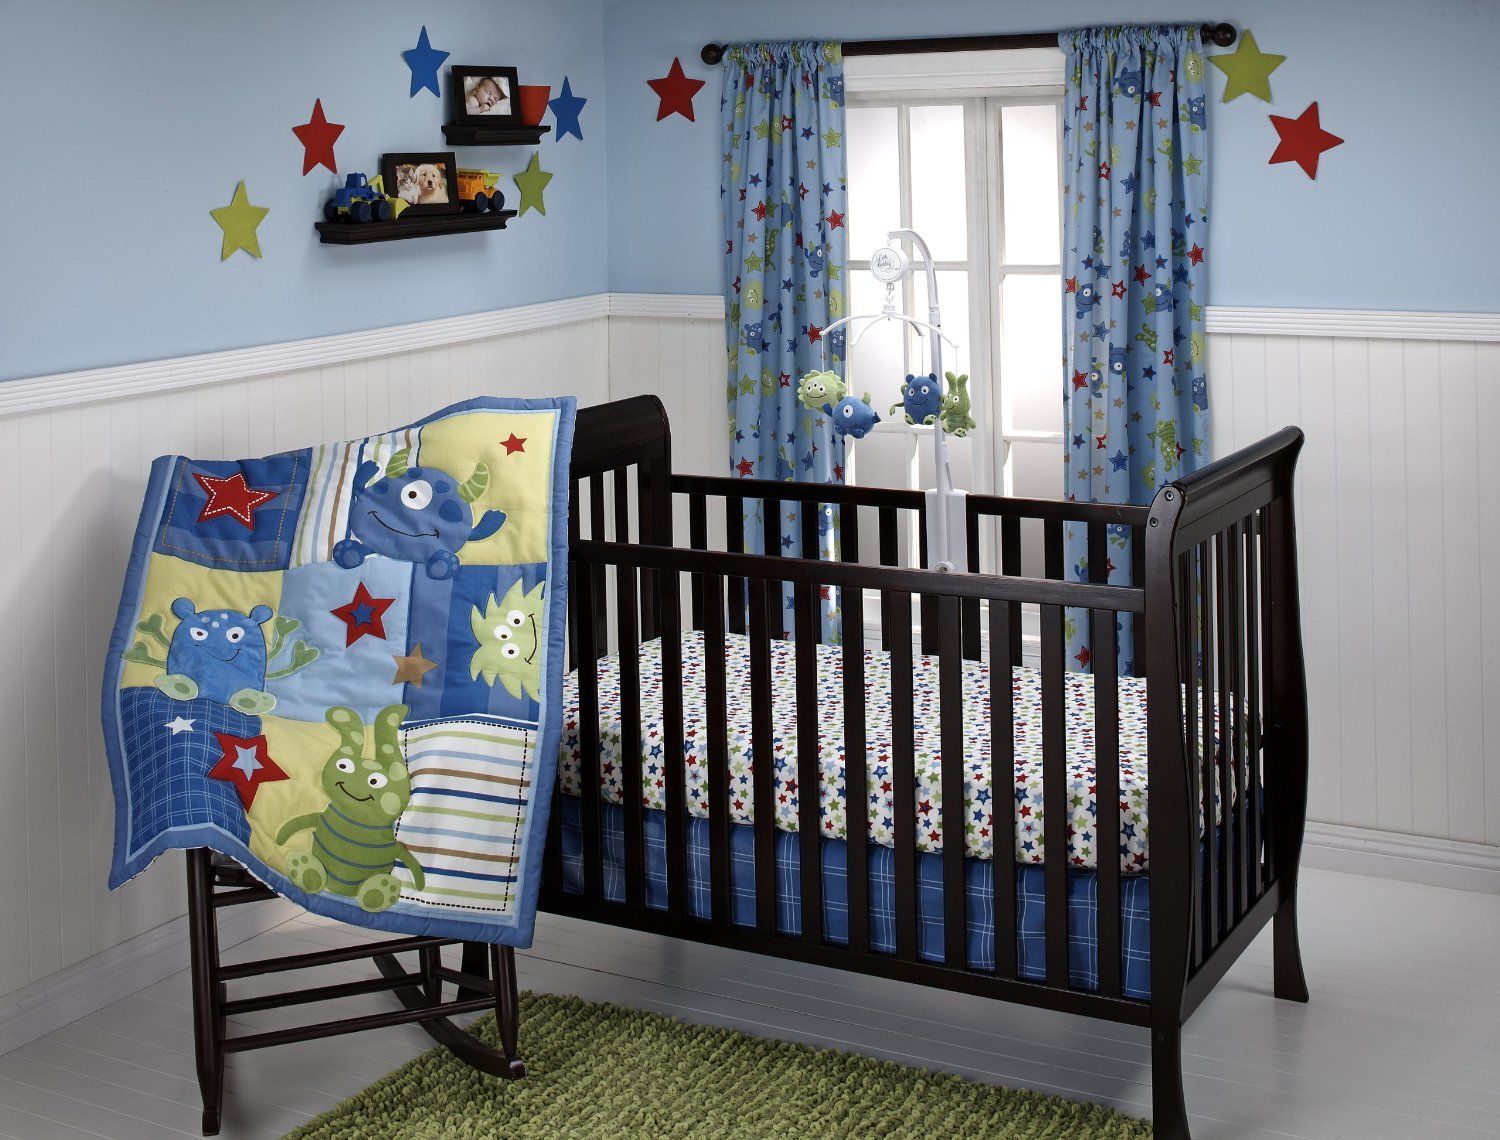 boys nursery wallpaper,product,infant bed,furniture,room,bed